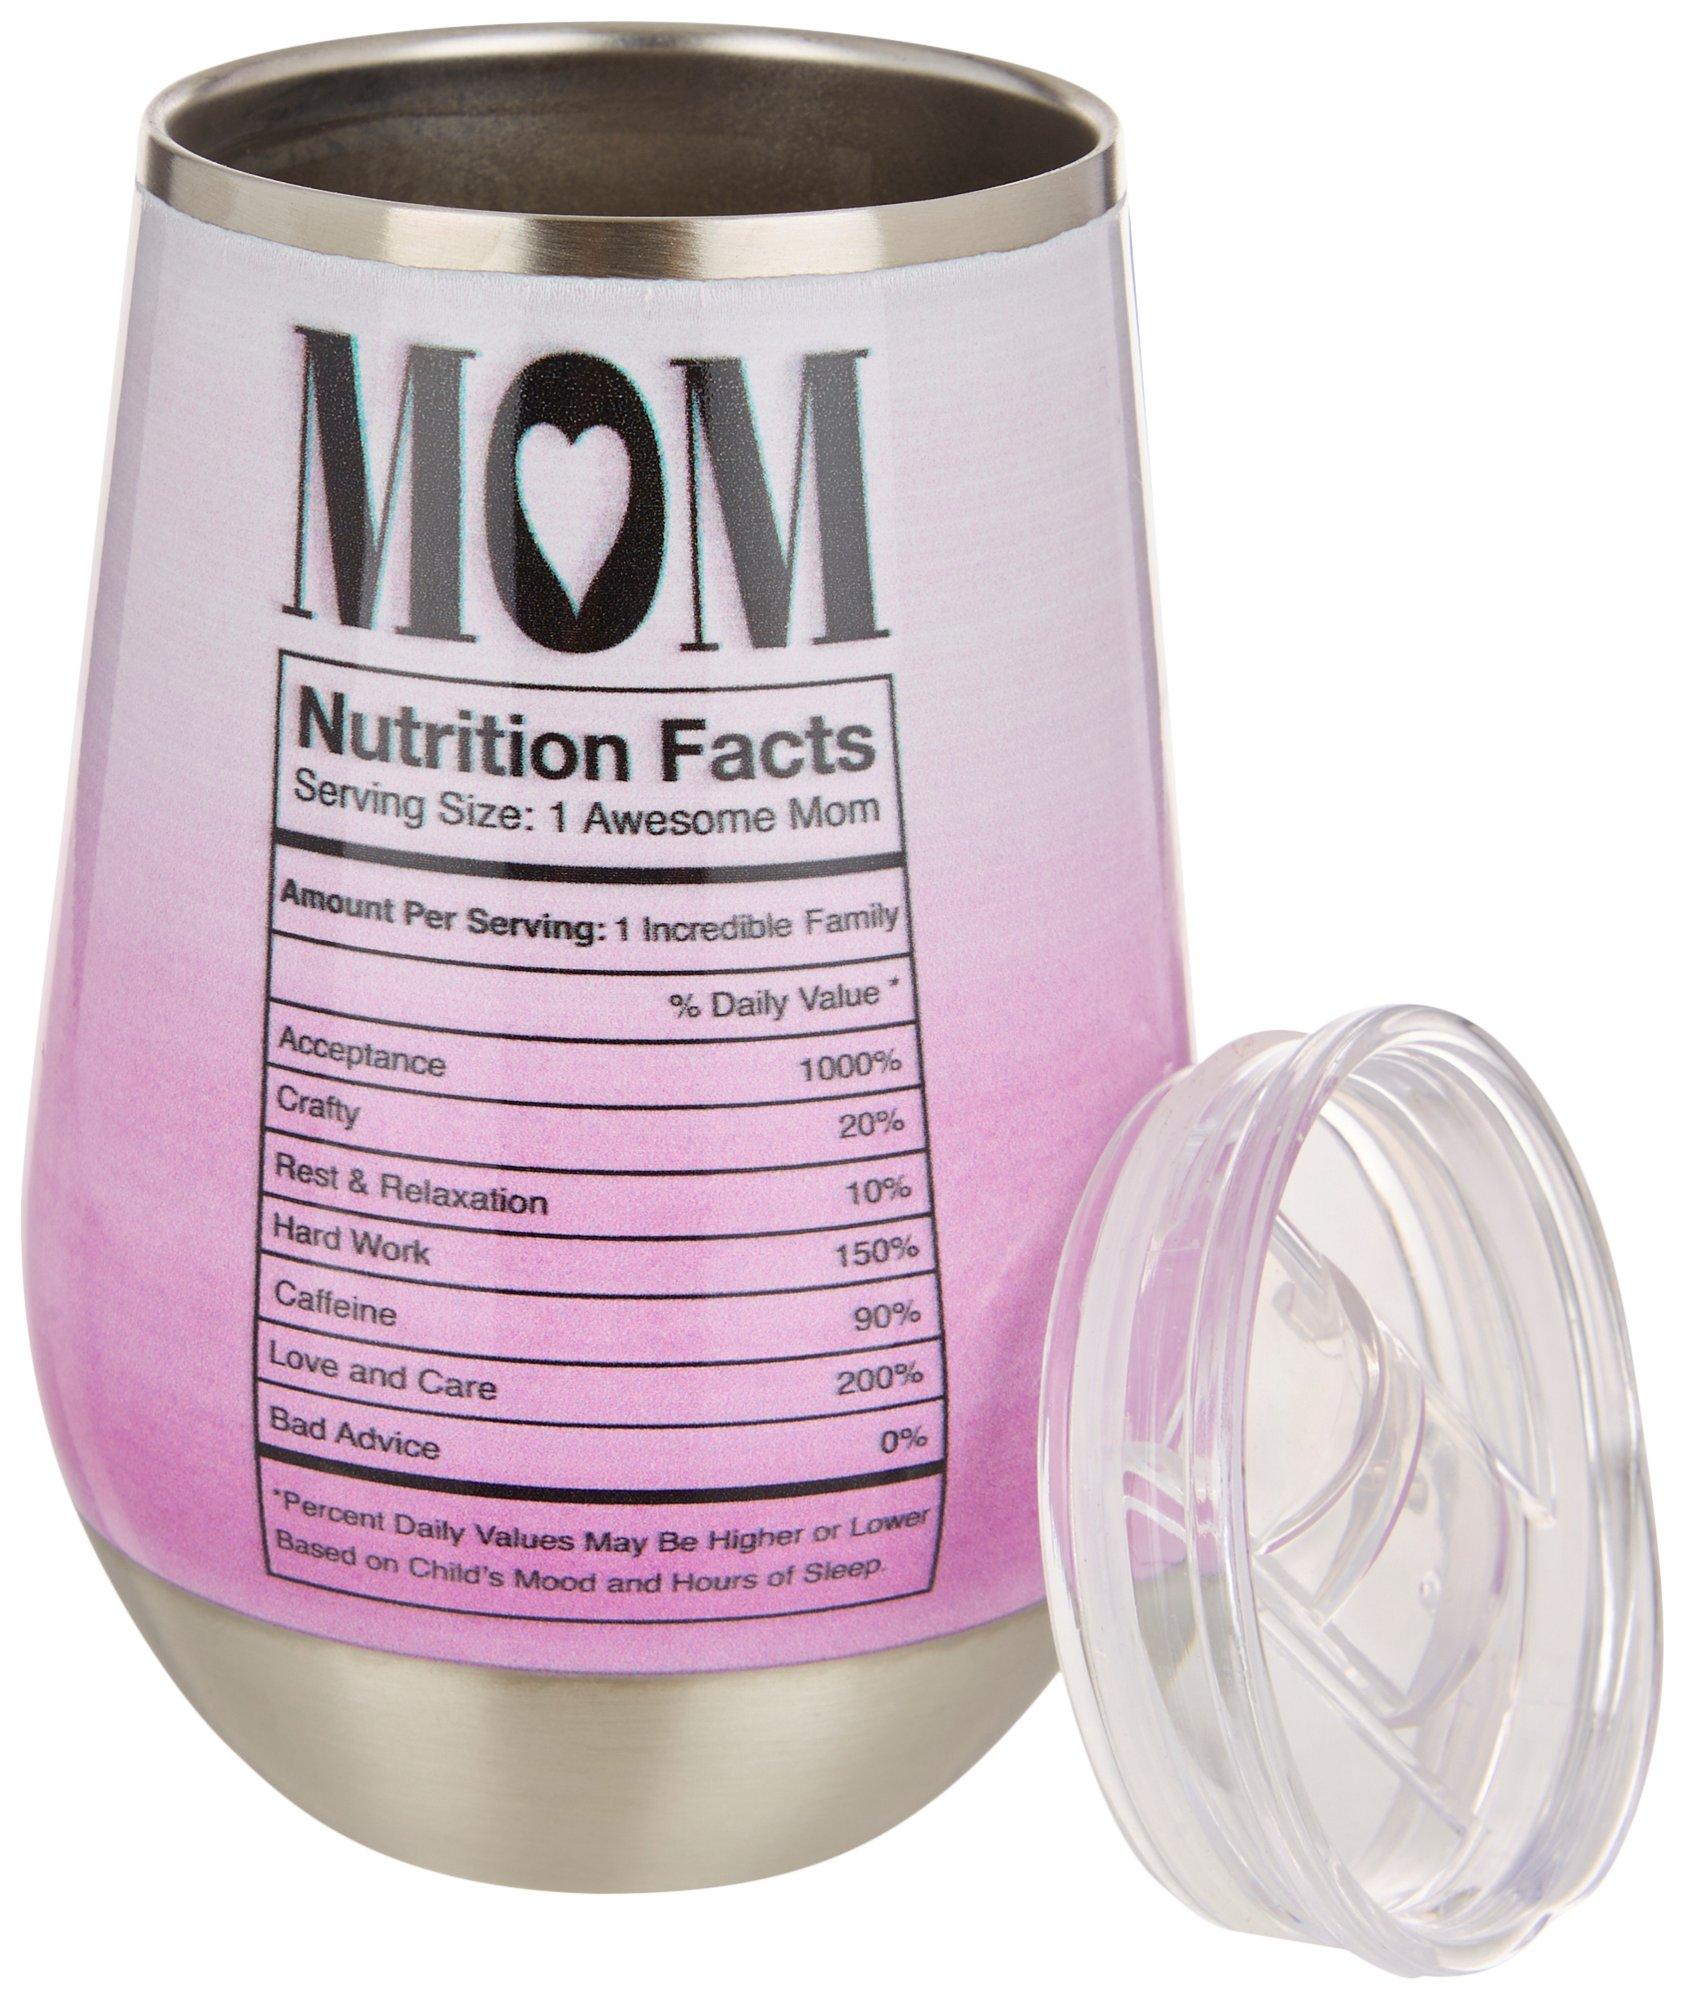 Meteor 12 oz. Stainless Steel Mom Nutrition Facts